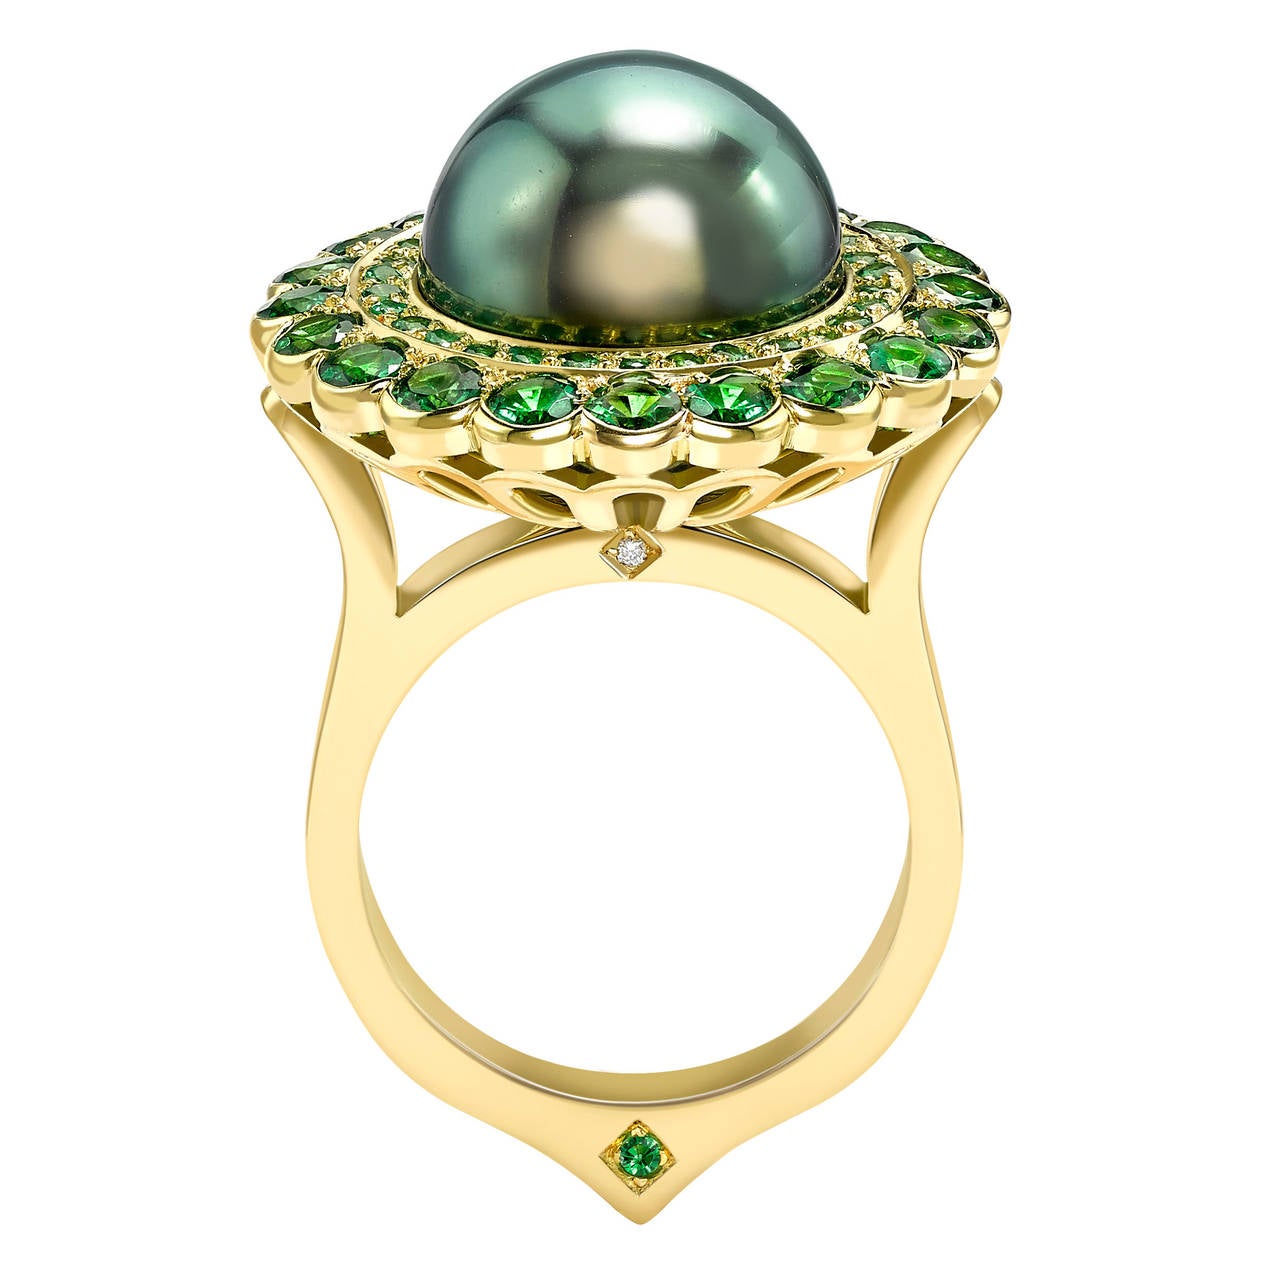 This ring is handcrafted from 18ct yellow gold and is set with a rare 12mm grade A Tahitian pearl, with exceptional lustre and play of colour. It is a very unusual green hue and is also set with 2.45ct of green tsavorites. 

Diameter of top: 2 cm